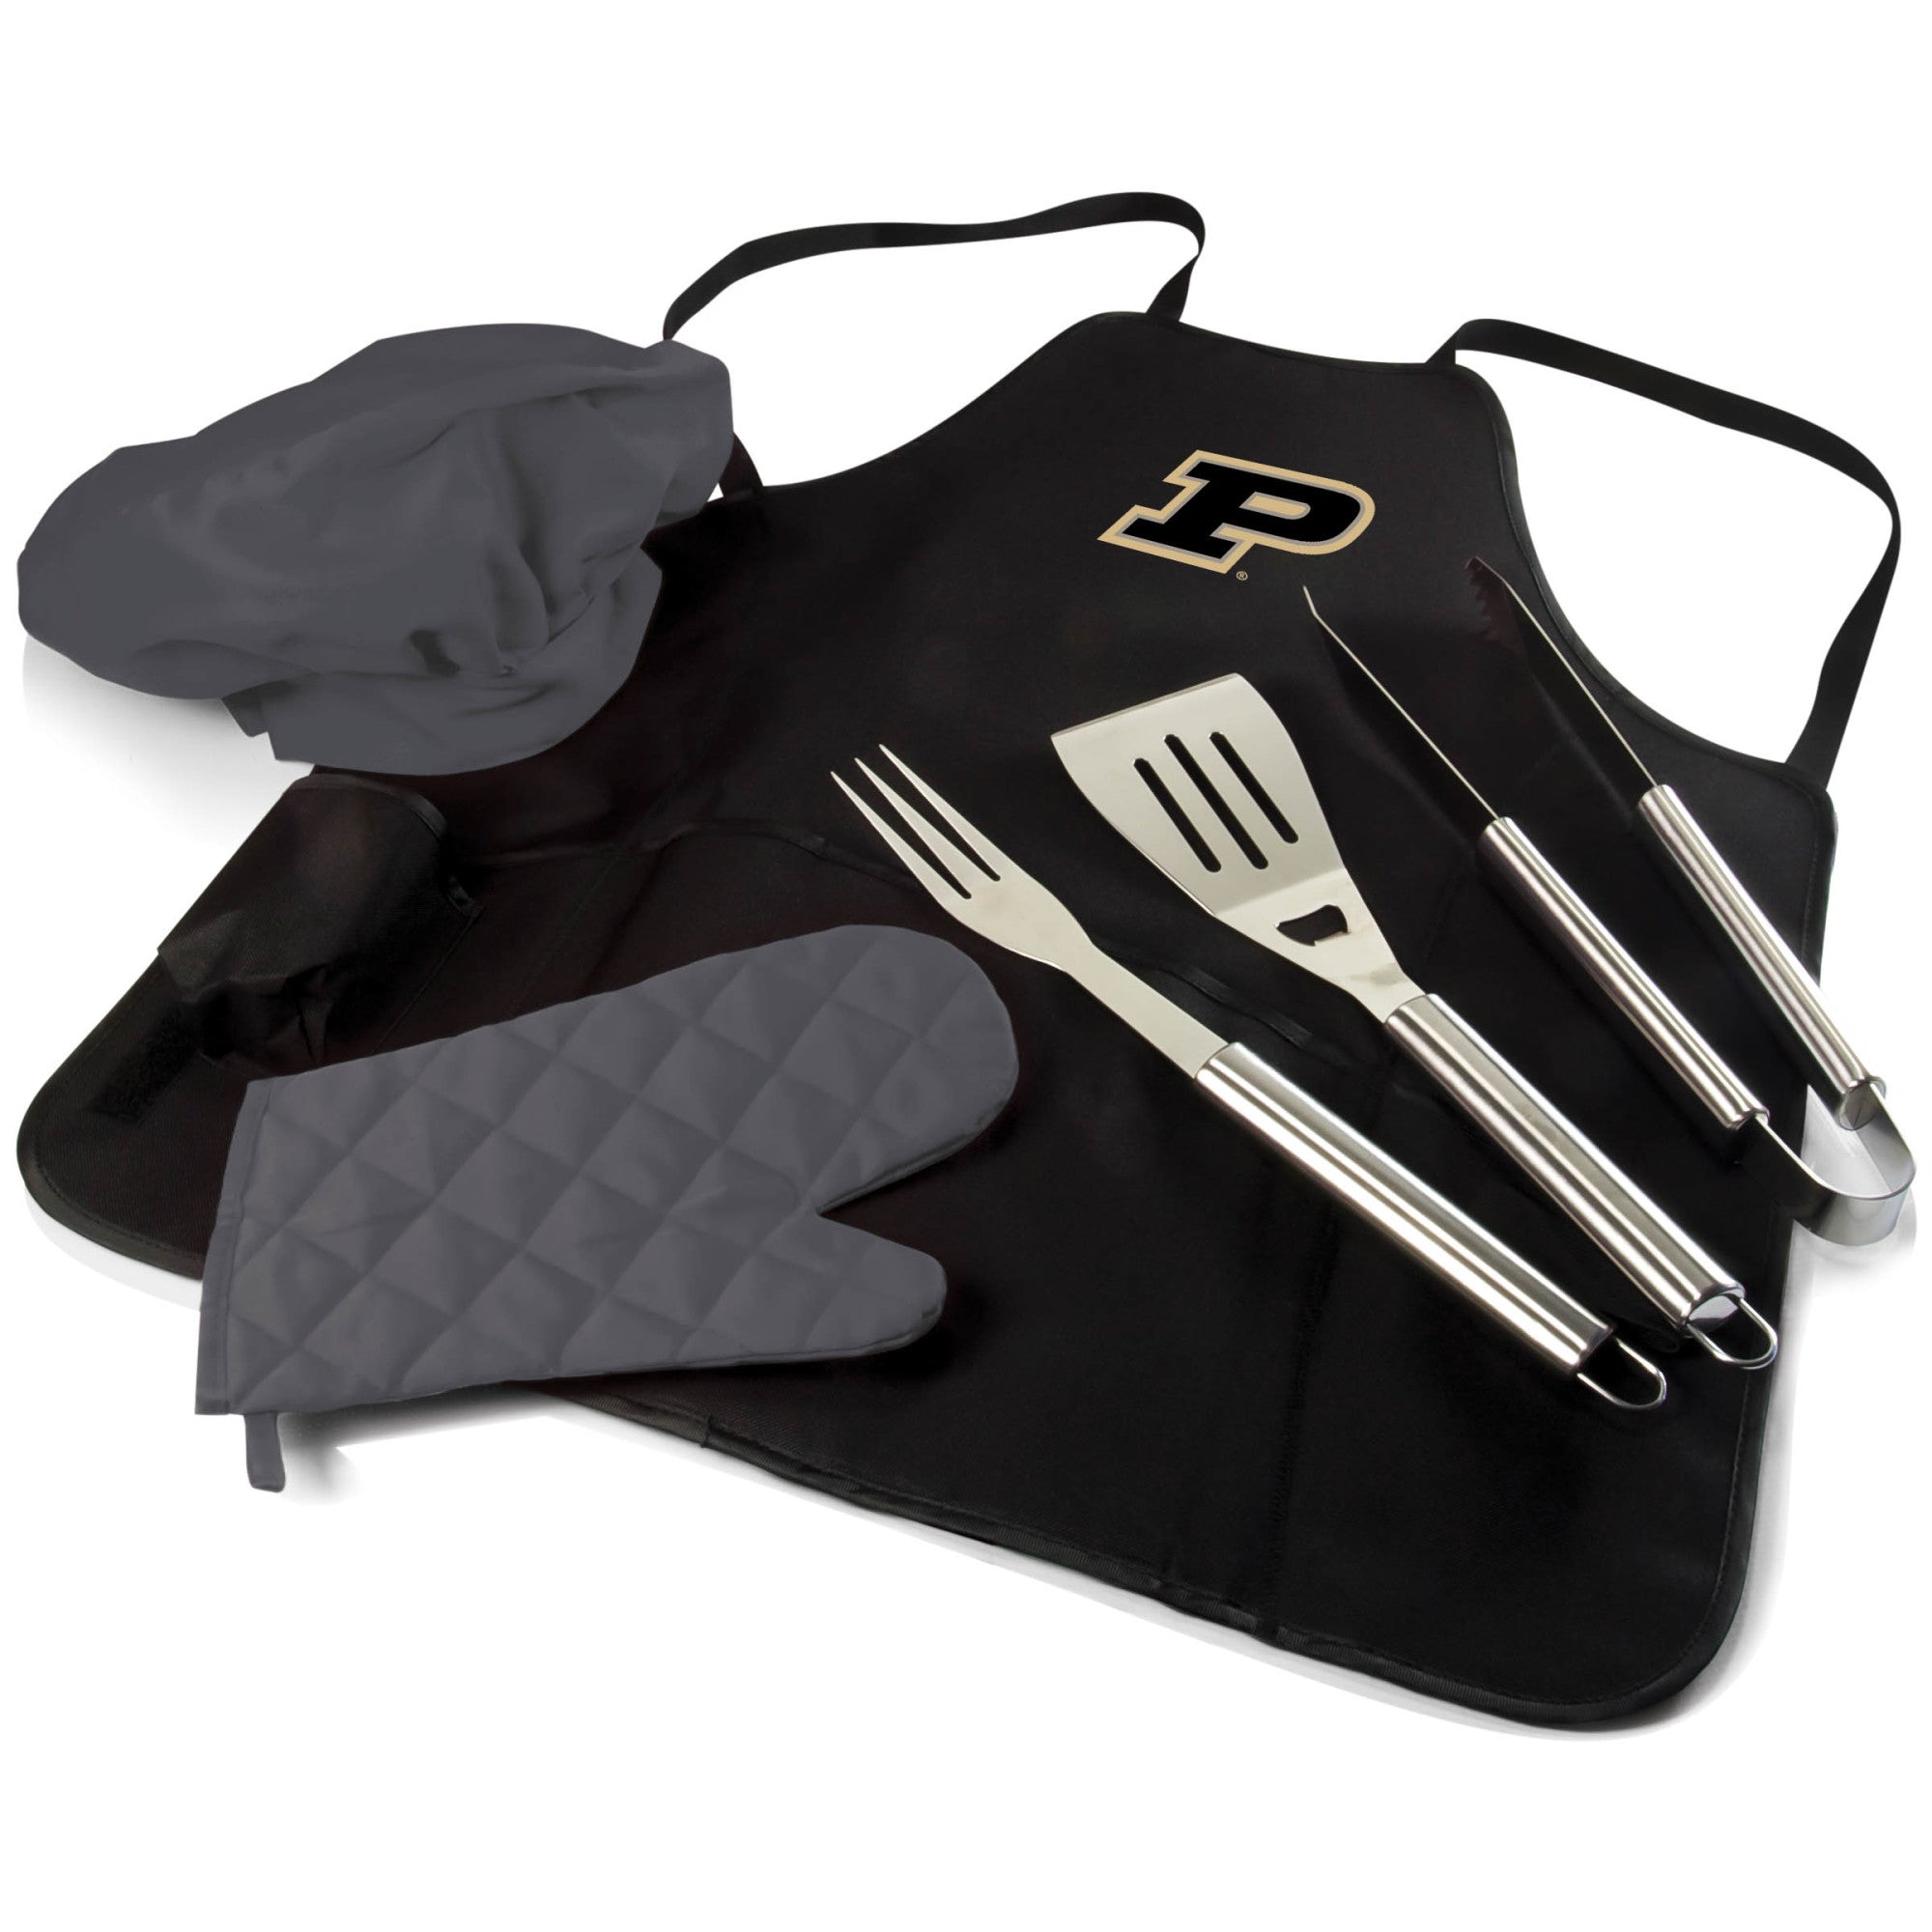 Purdue Boilermakers - BBQ Apron Tote Pro Grill Set, (Black with Gray Accents)